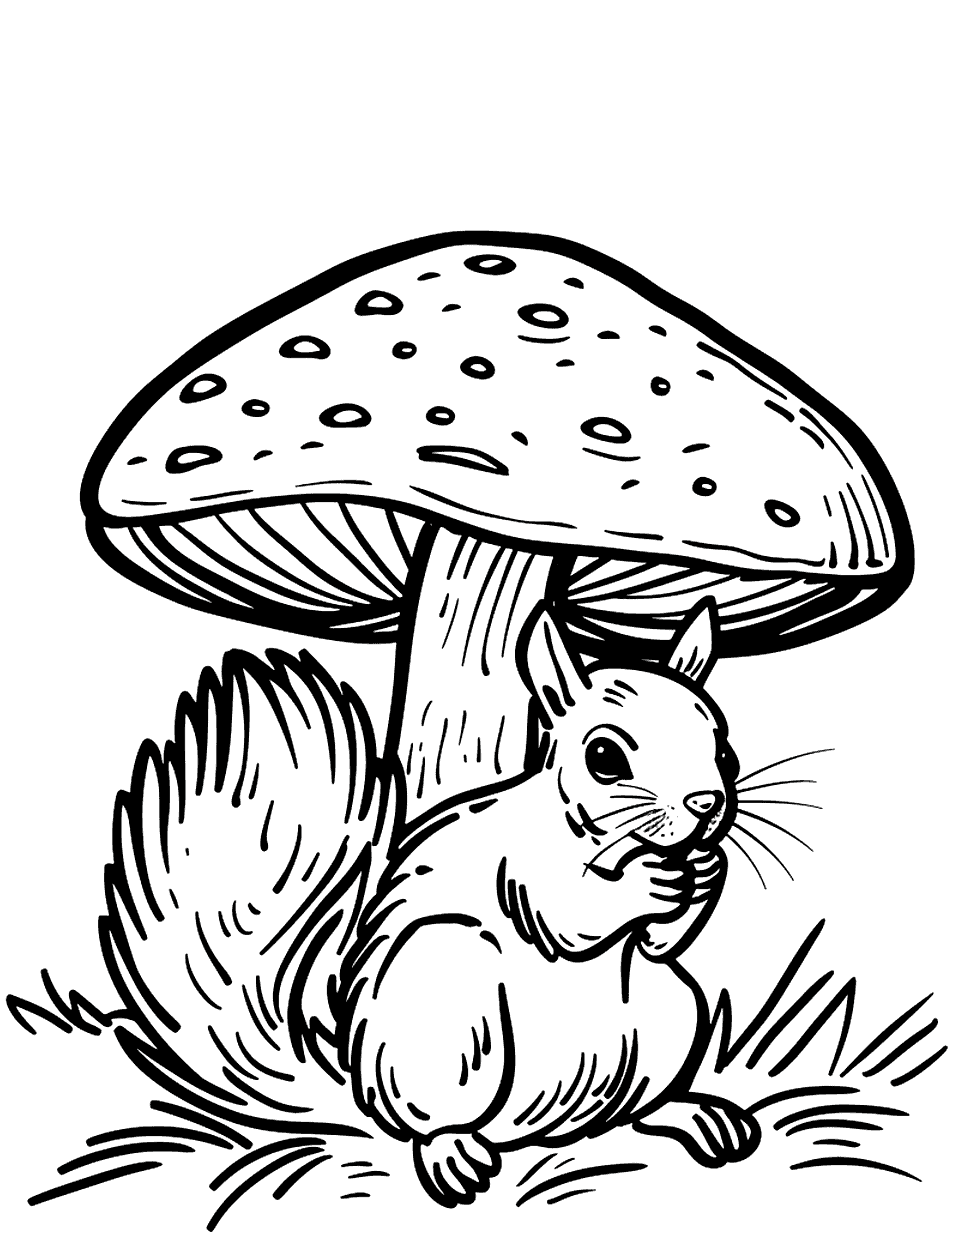 Squirrel and a Mushroom Coloring Page - A squirrel taking shelter under a large mushroom.